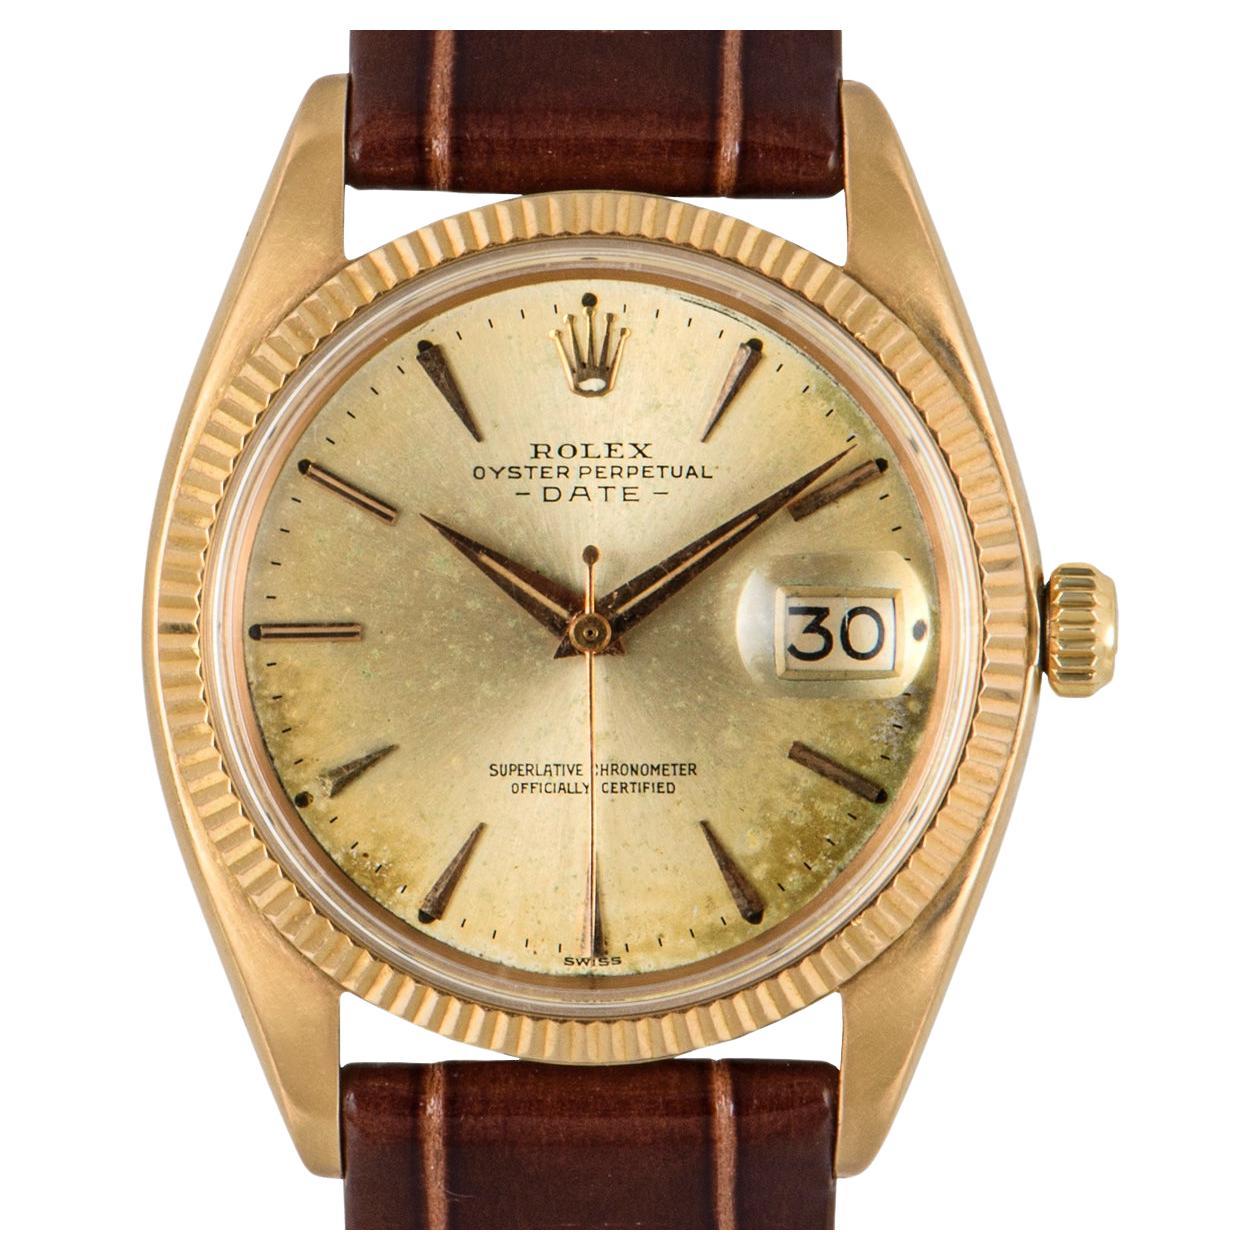 A mens vintage Date in yellow gold by Rolex. Featuring a champagne dial with applied hour markers, a date aperture and a fixed yellow gold bezel. The watch is fitted with a plastic glass, a self-winding automatic movement and is presented on a